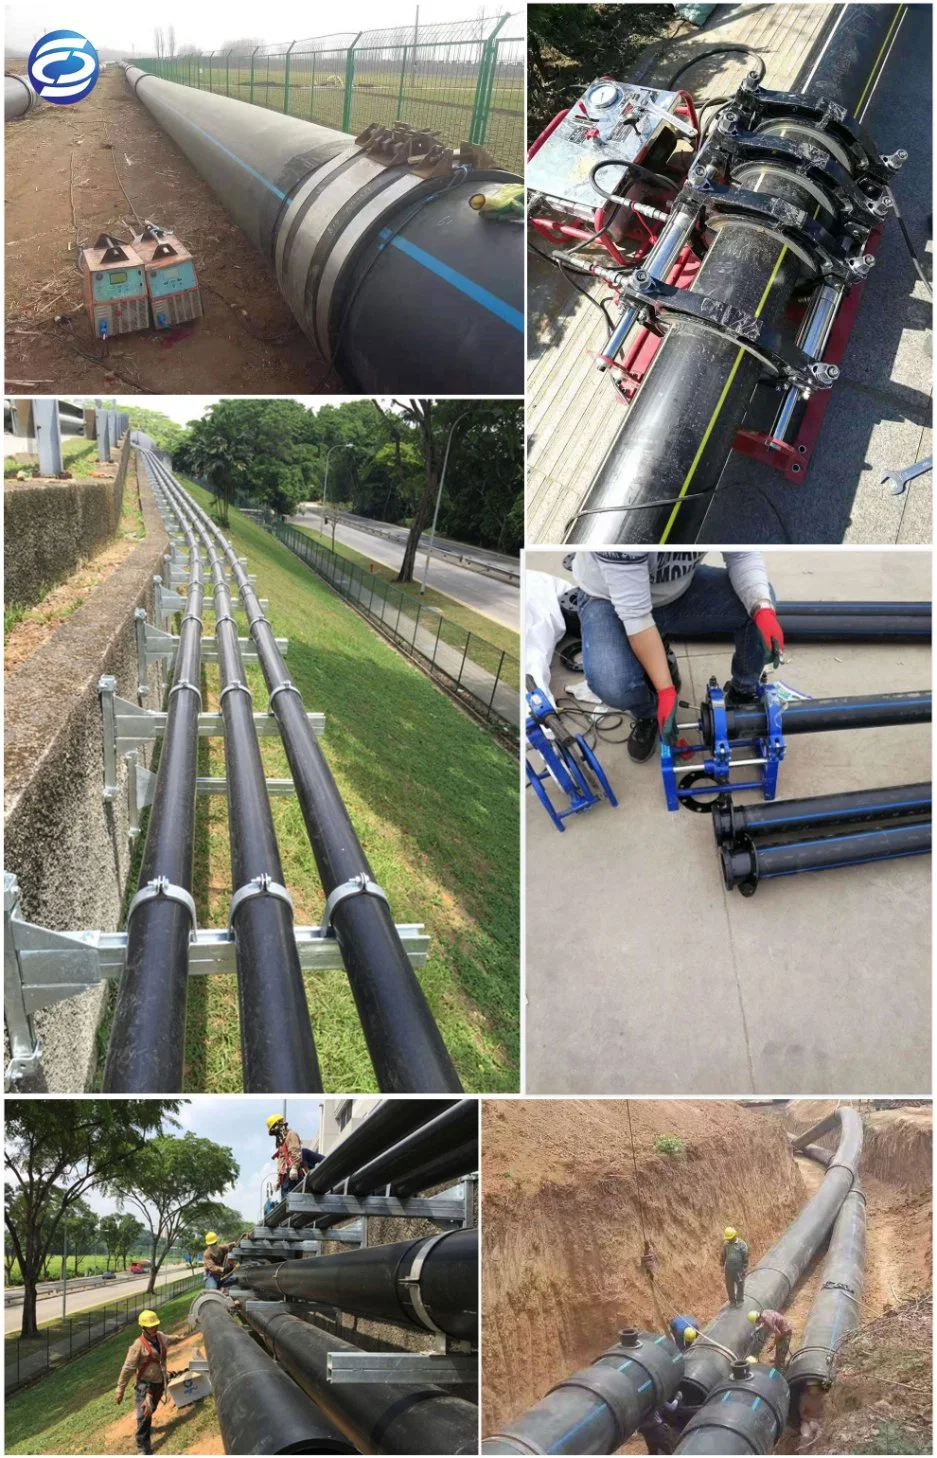 HDPE Pipe DN315mm SDR26 Pn0.6MPa for Water Supply/Agricultural Irrigation